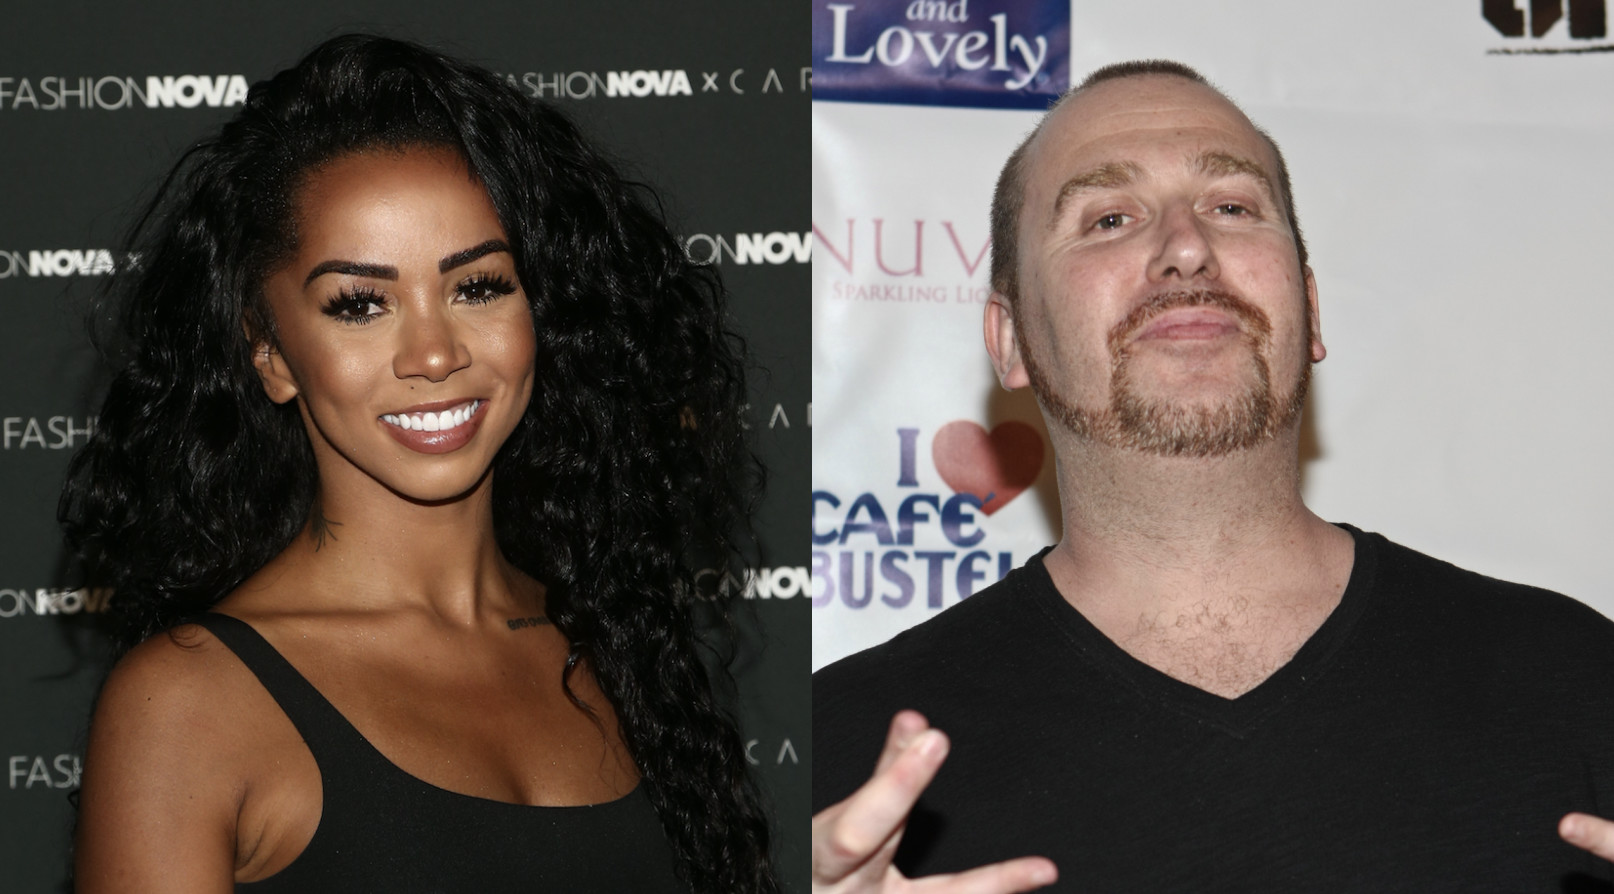 Brittany Renner Discloses Her Opinion On DJ Vlad: “The Feds”